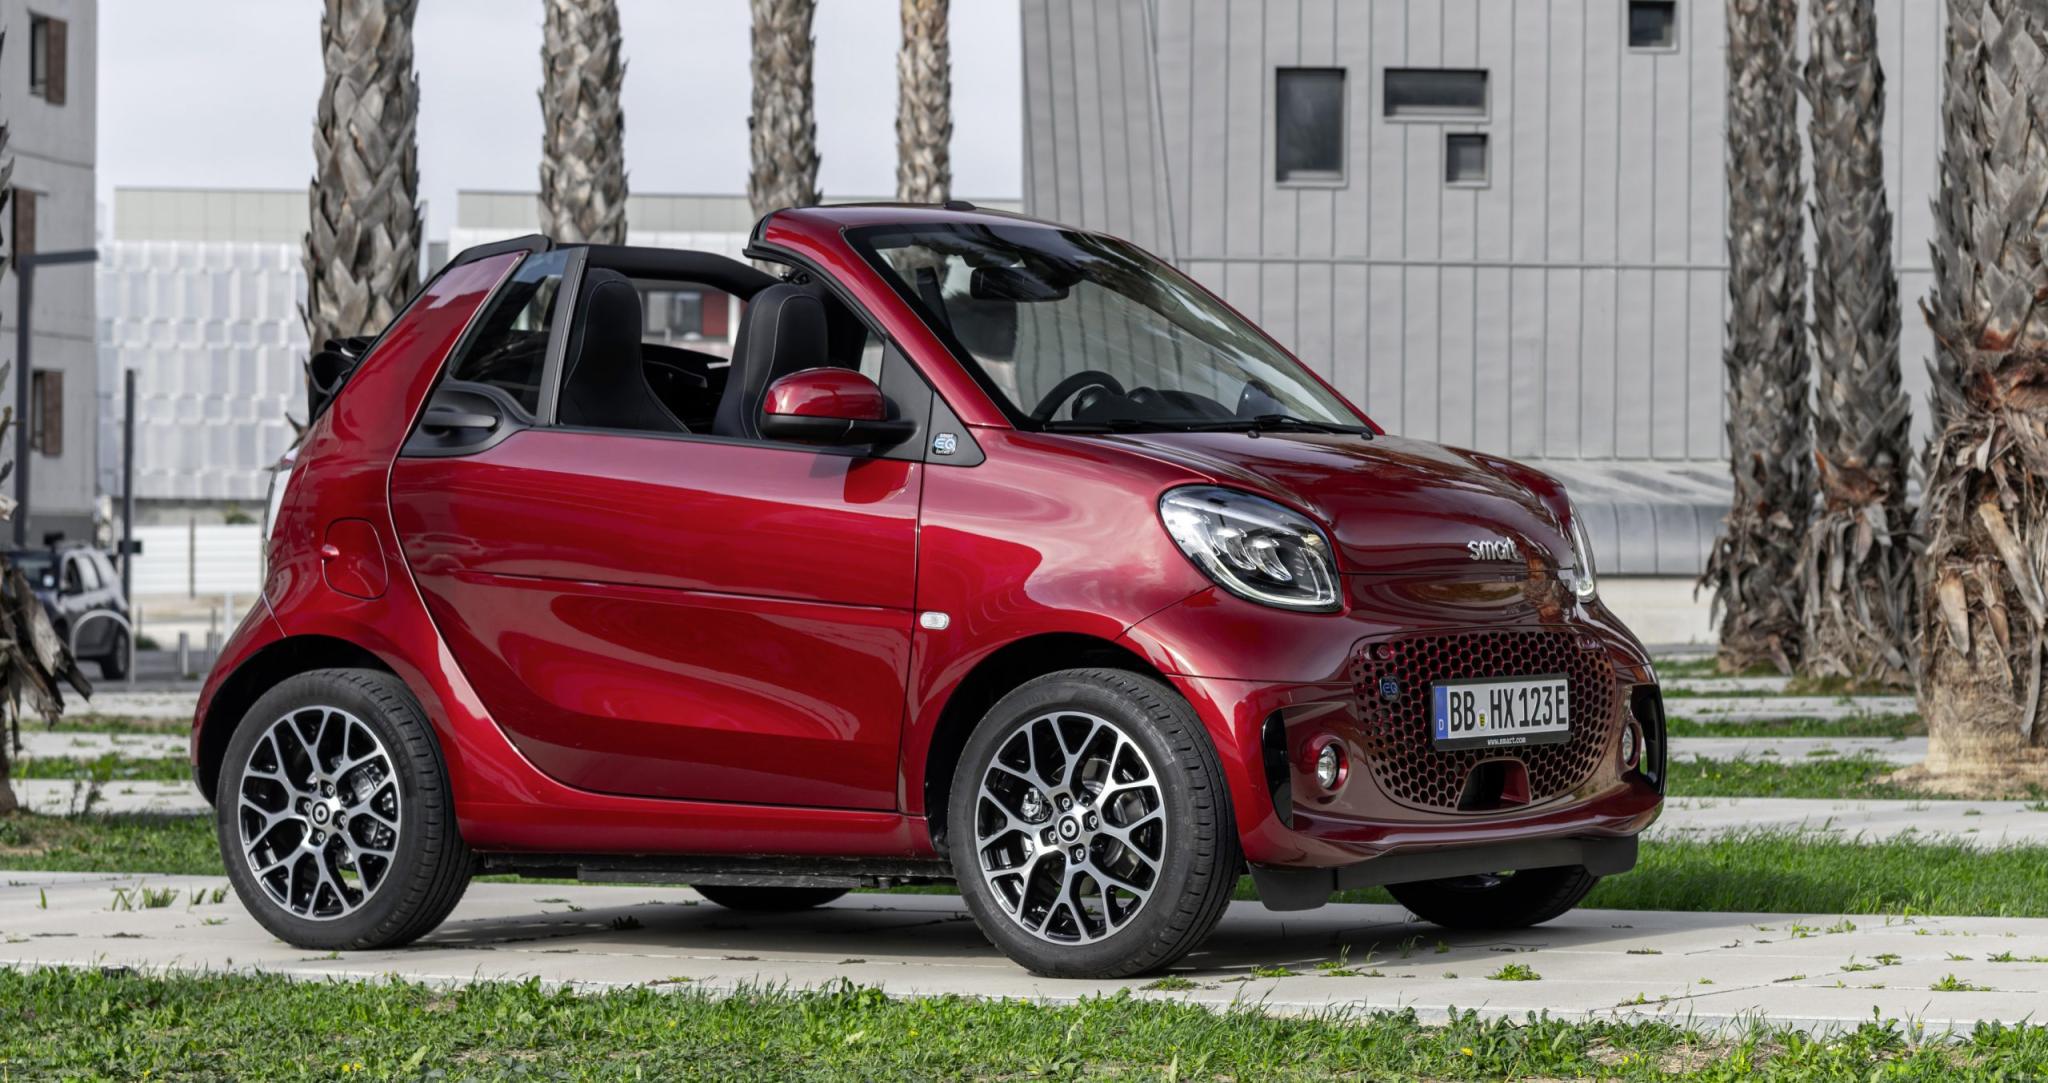 Die neue Generation smart - Montpellier 2019: smart EQ fortwo cabrio;Stromverbrauch kombiniert 16,8 - 14,2 kWh/100km, CO2-Emissionen kombiniert: 0 g/km* The new generation smart - Montpellier 2019: smart EQ fortwo cabrio;Combined electrical consumption 16.8 - 14.2 kWh/100km, combined CO2 emissions: 0 g/km*